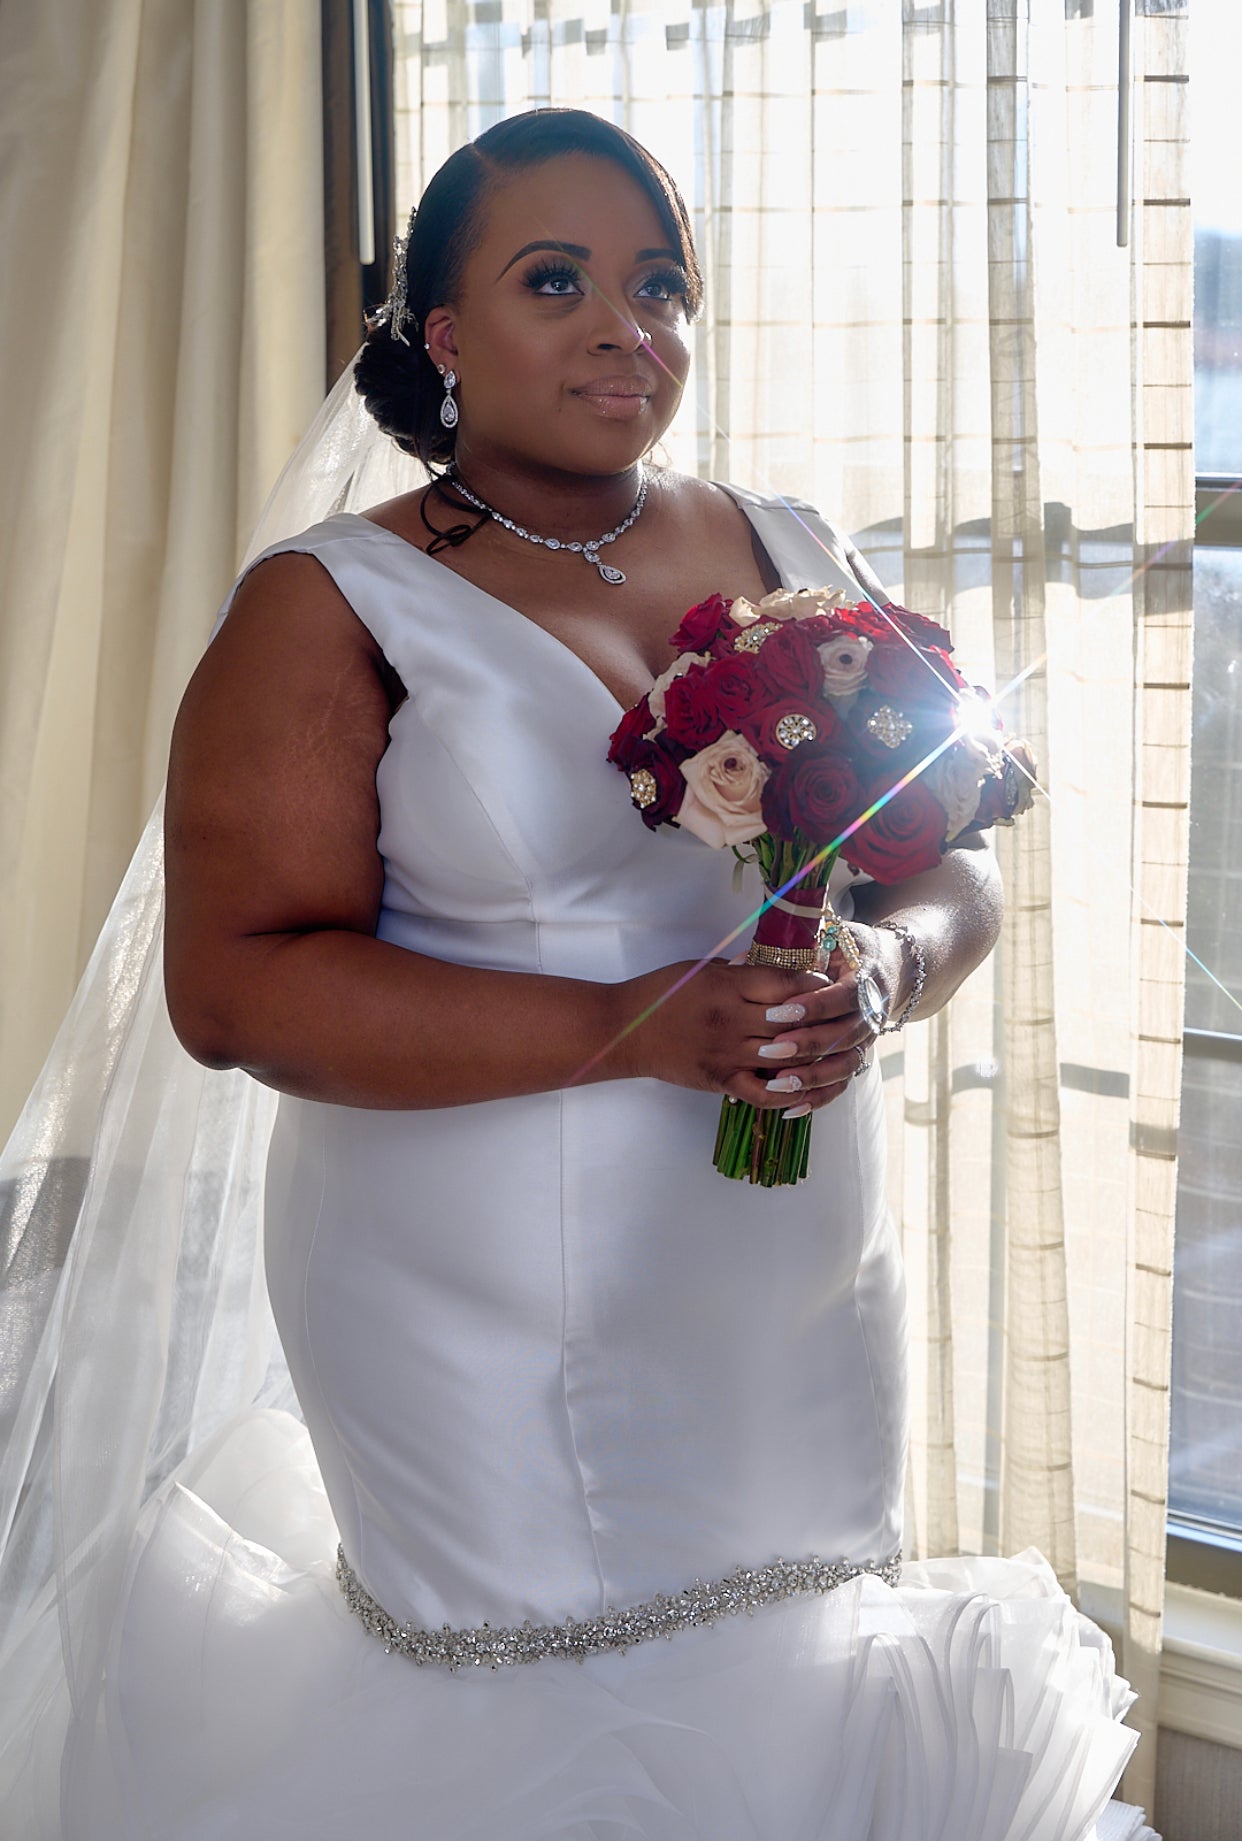 This Bride Became A Wife And A Lawyer On The Same